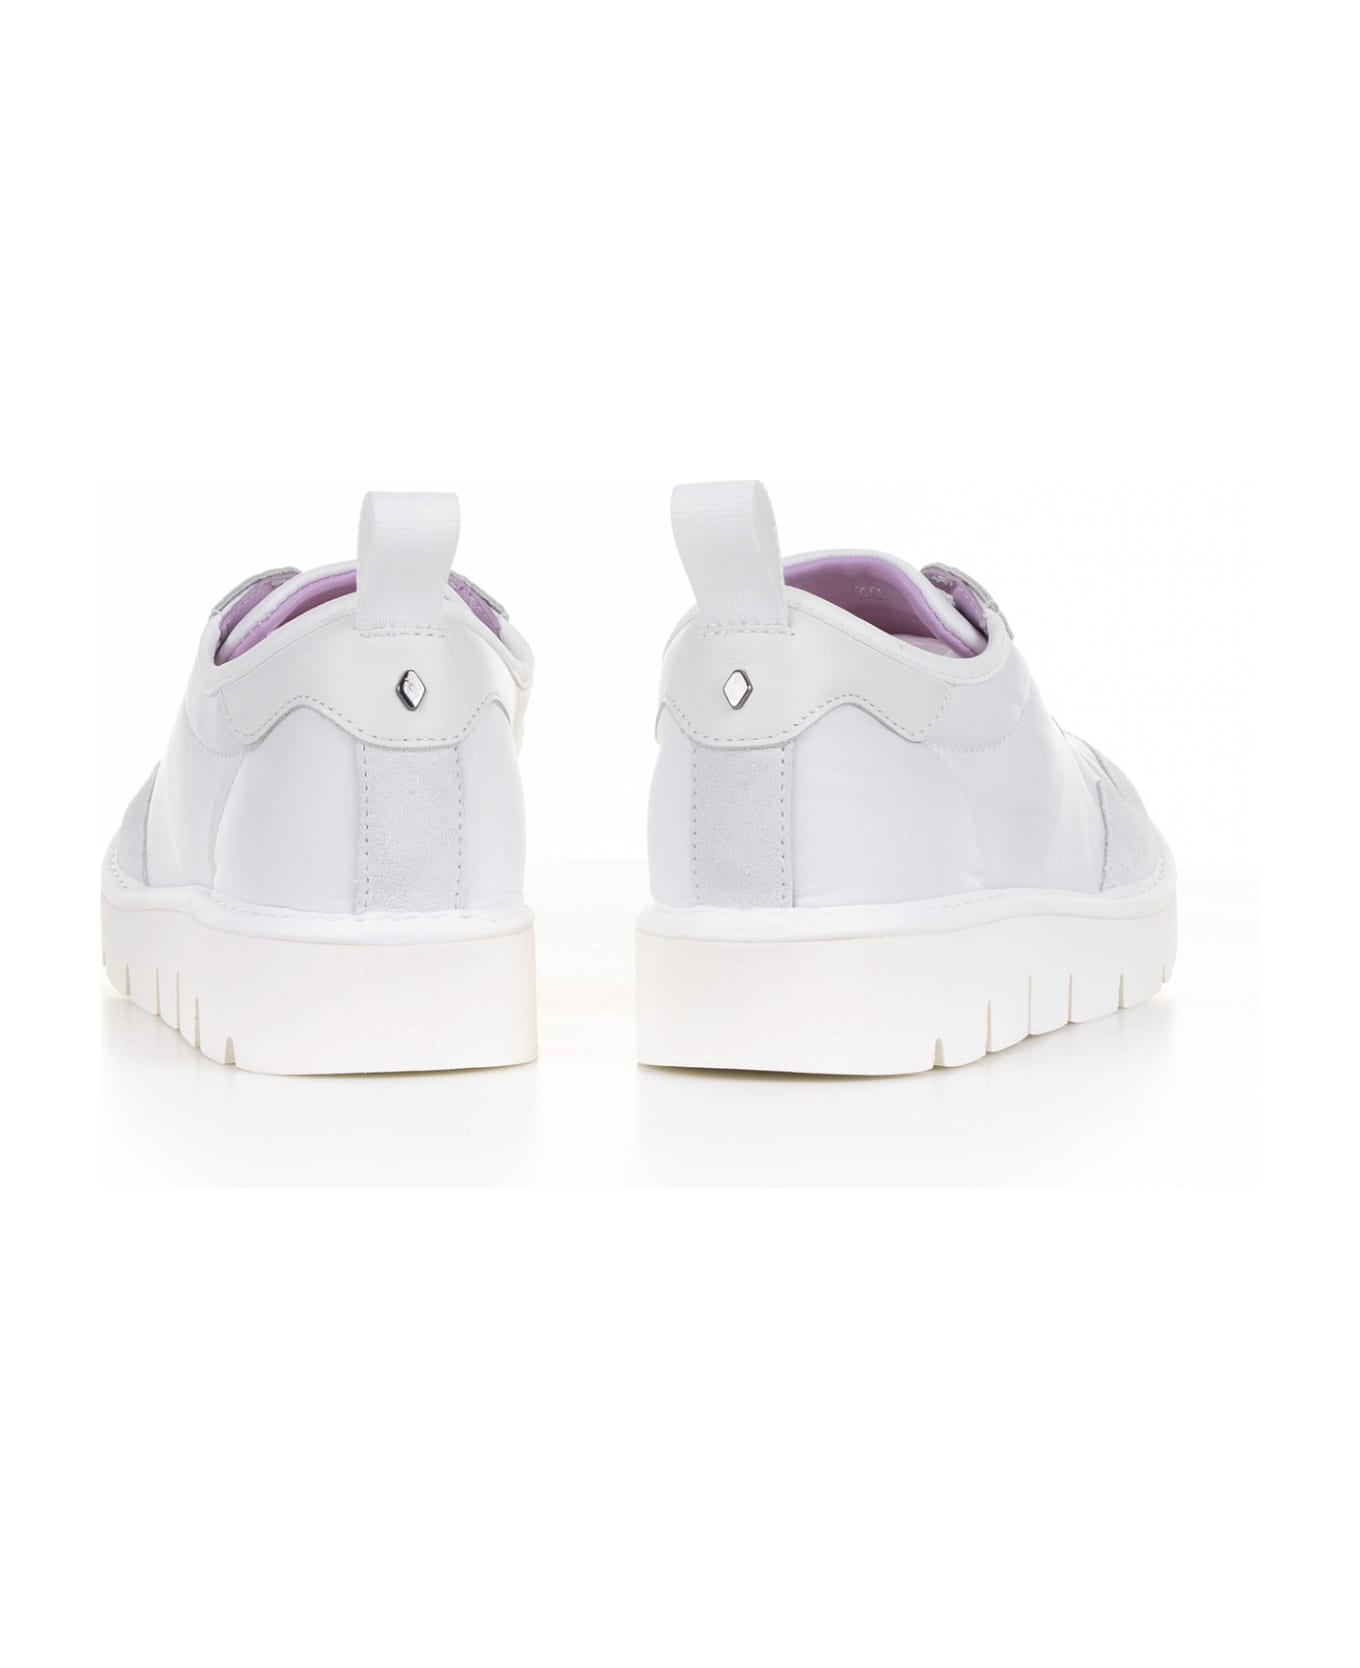 Panchic Slip On Sneakers In Nylon And Suede - WHITE